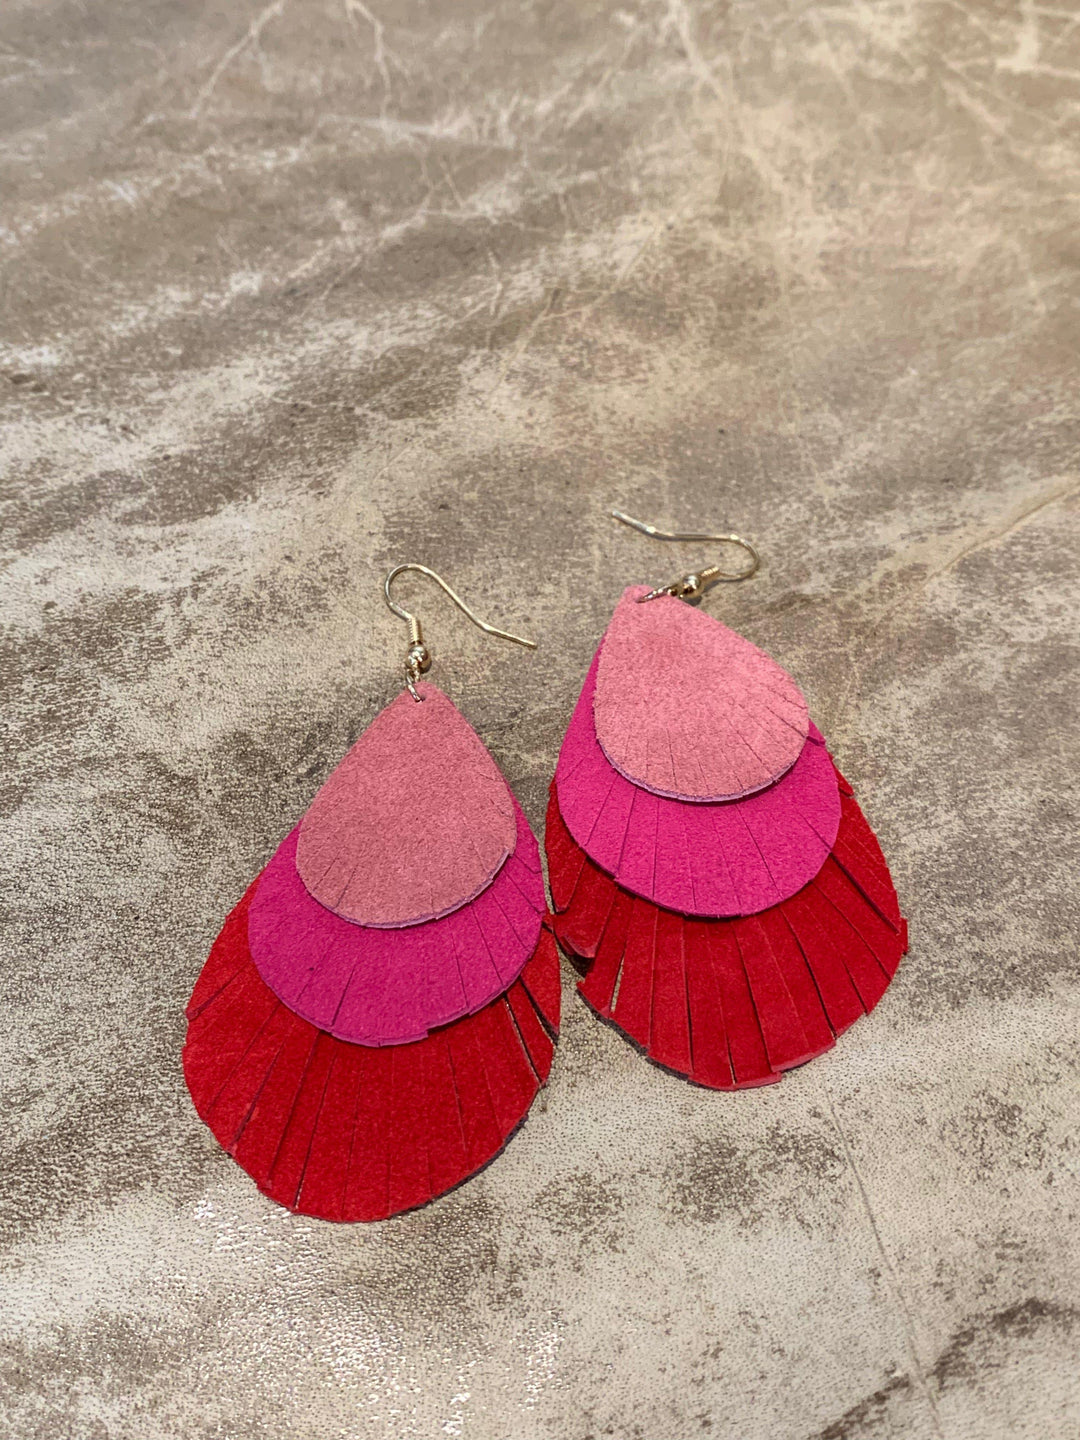 Leather layered earrings from Tres Chic